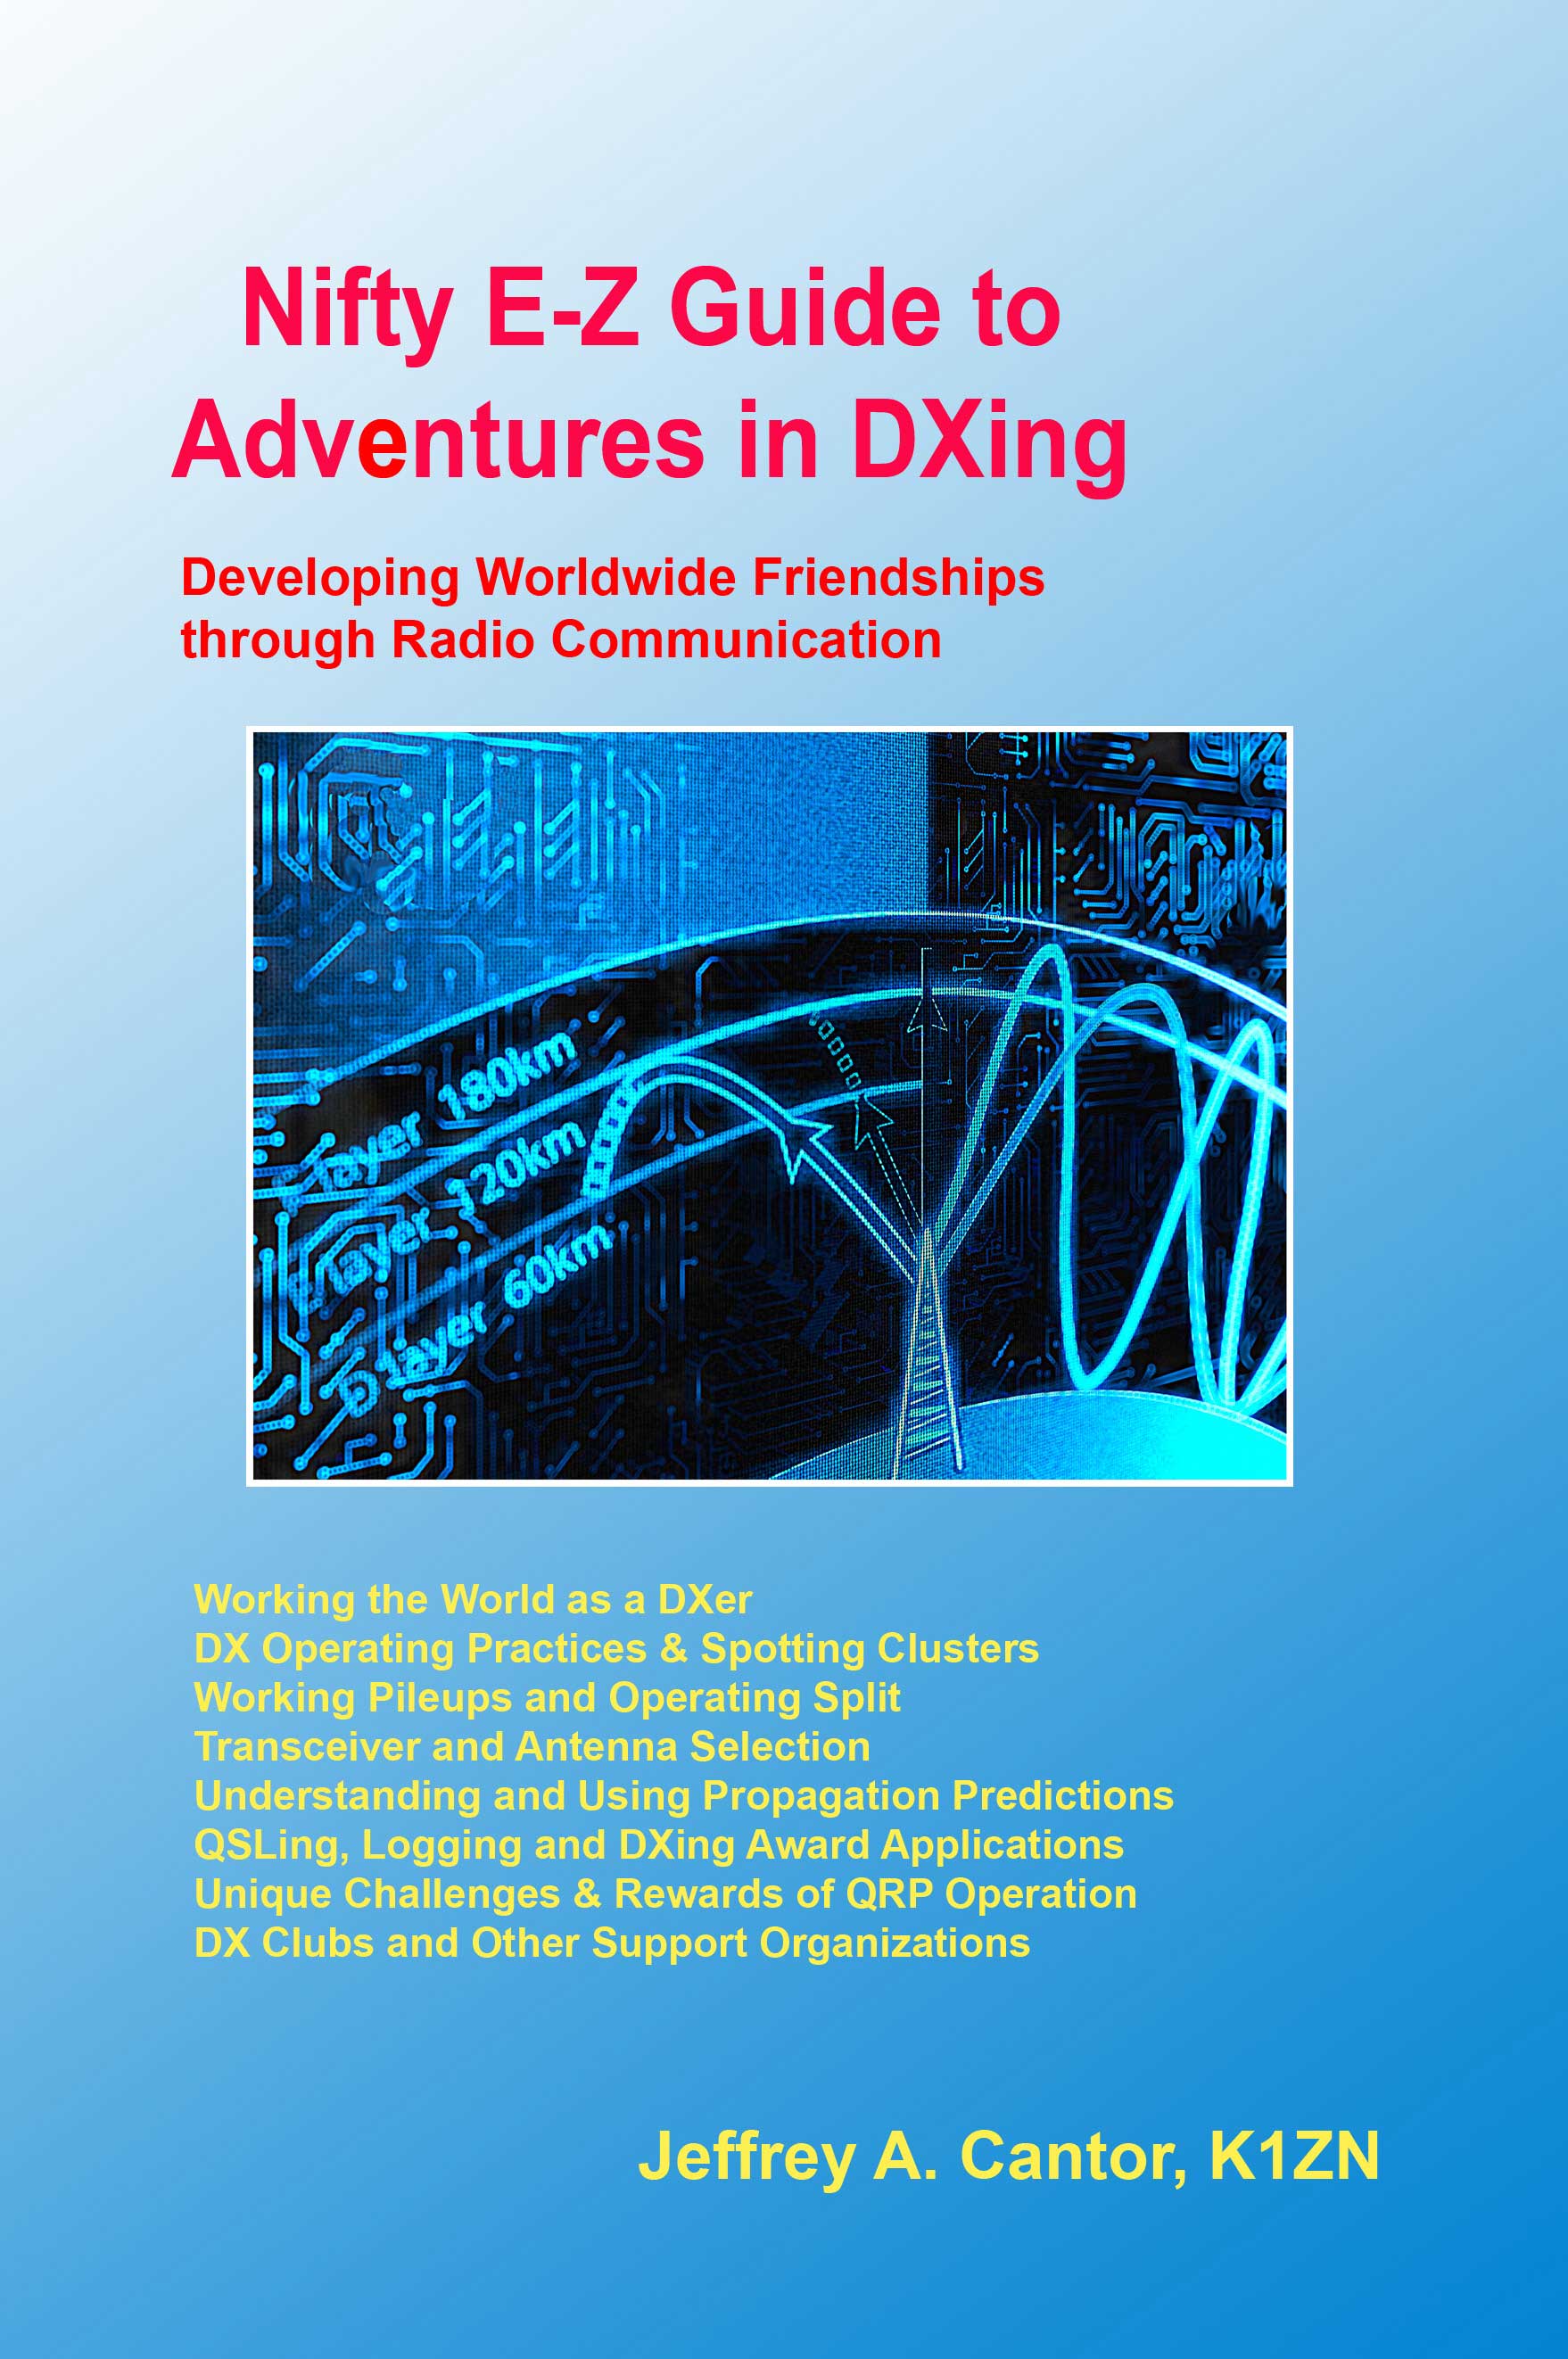 Nifty E-Z Guide to Adventures in DXing